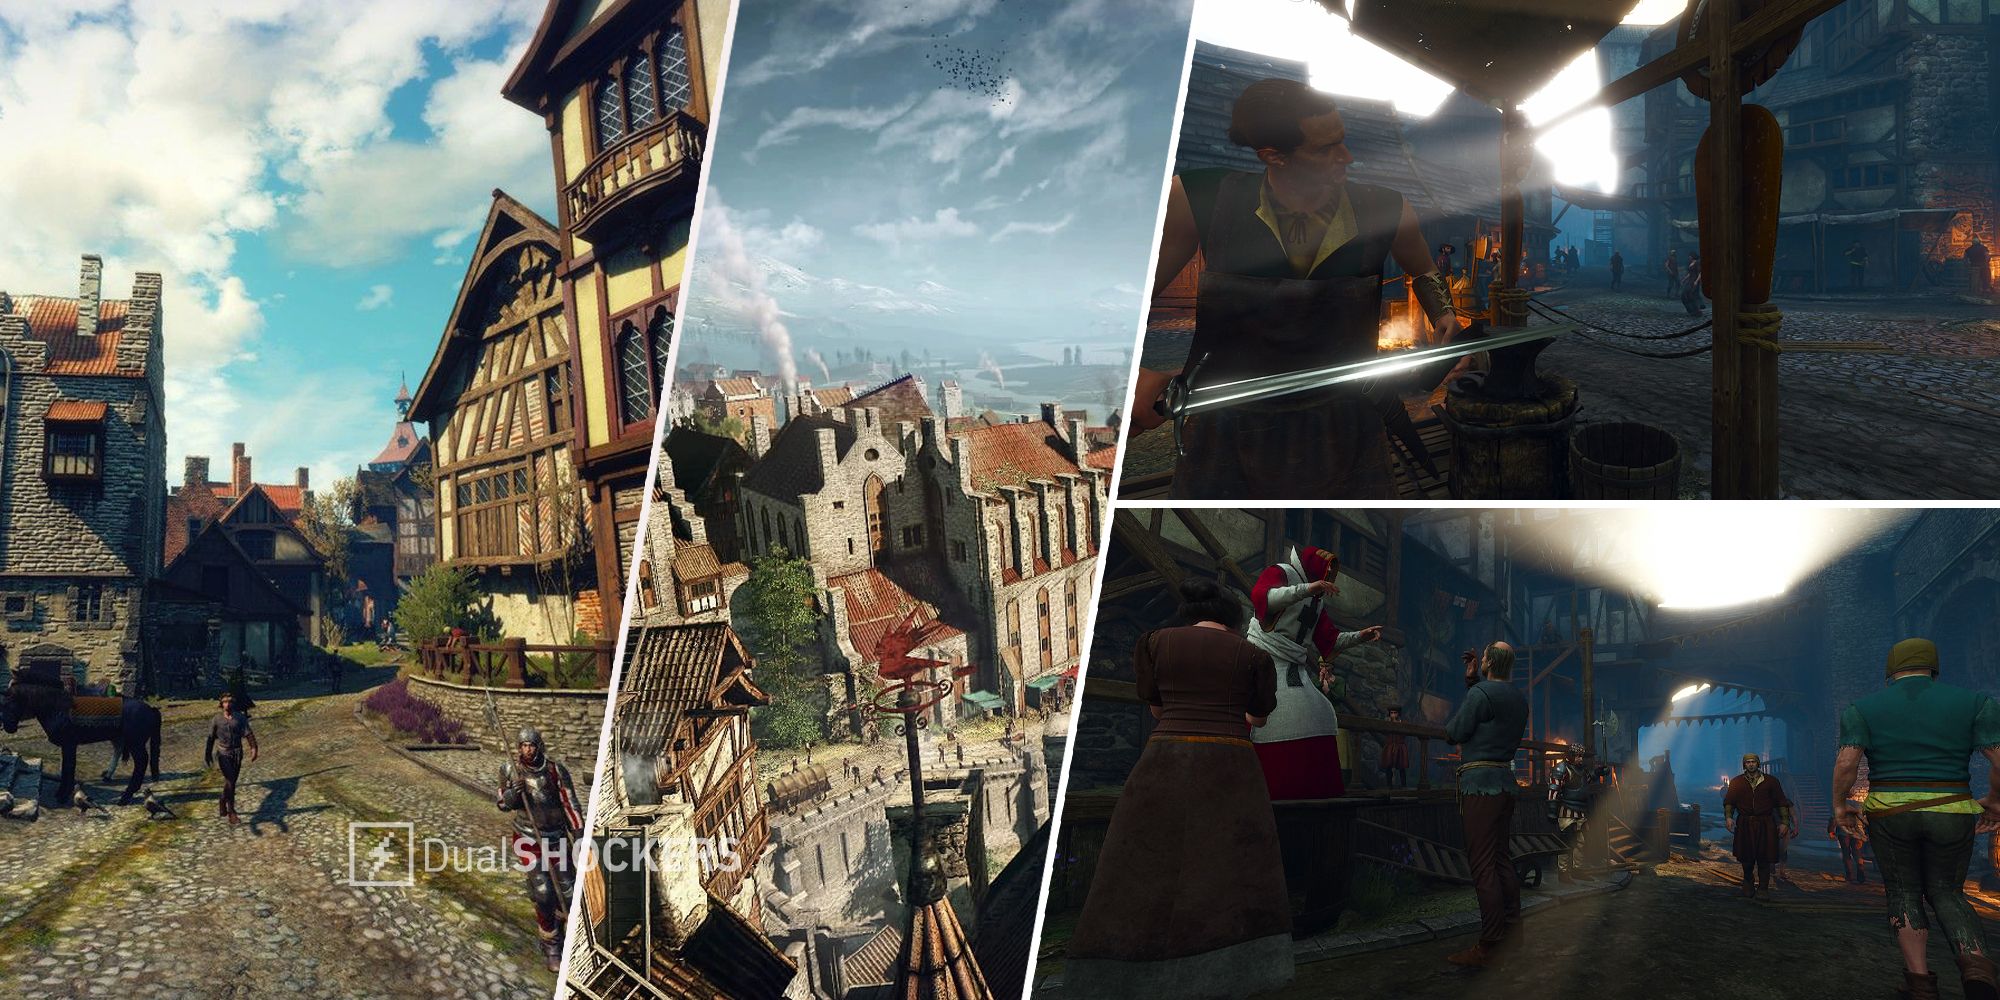 The Witcher 3 city of Novigrad and residents